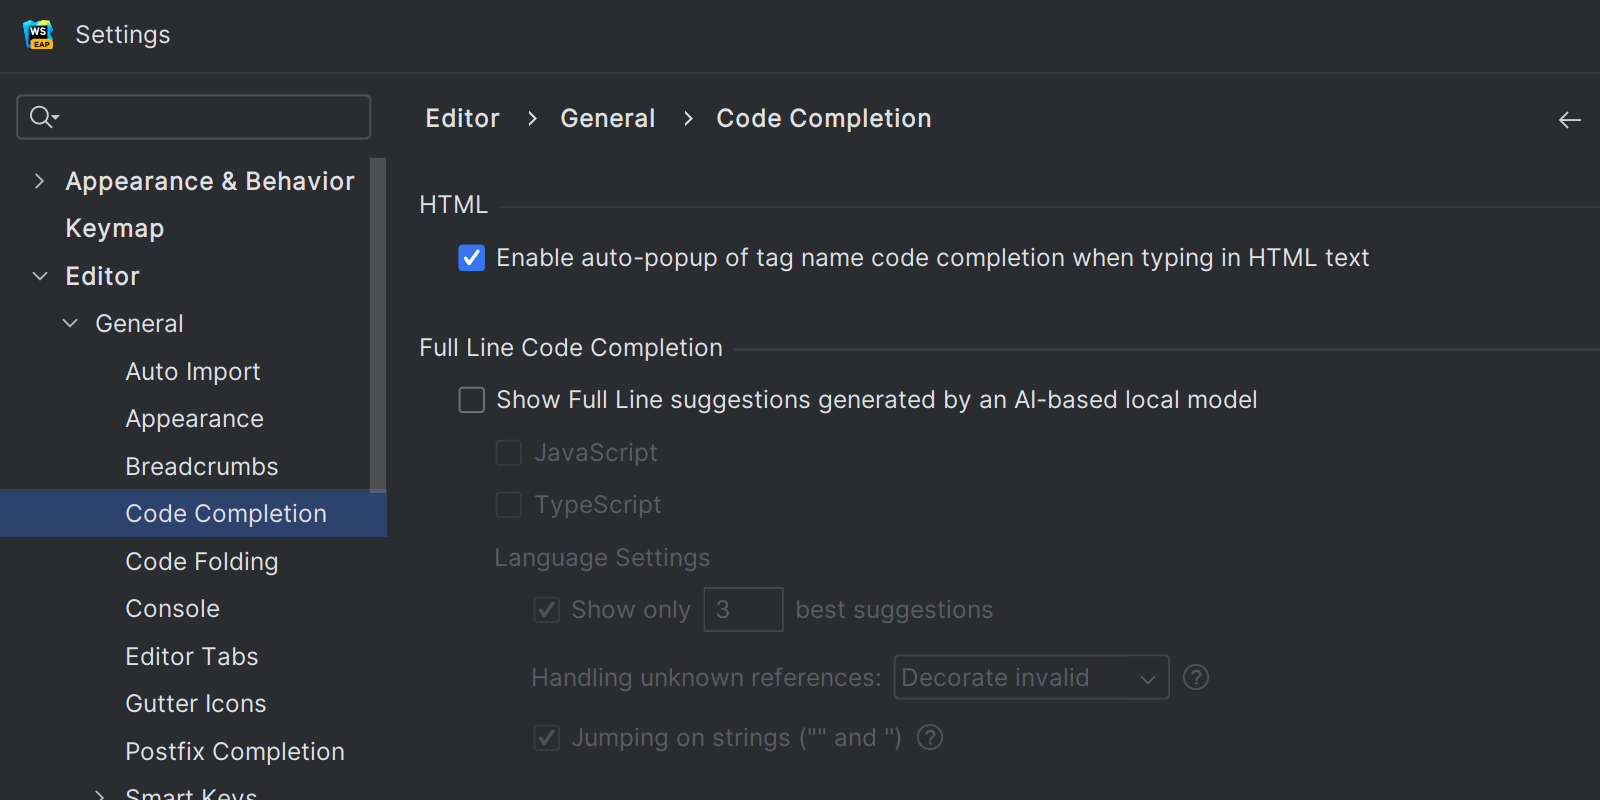 Showing the WebStorm settings for code completion